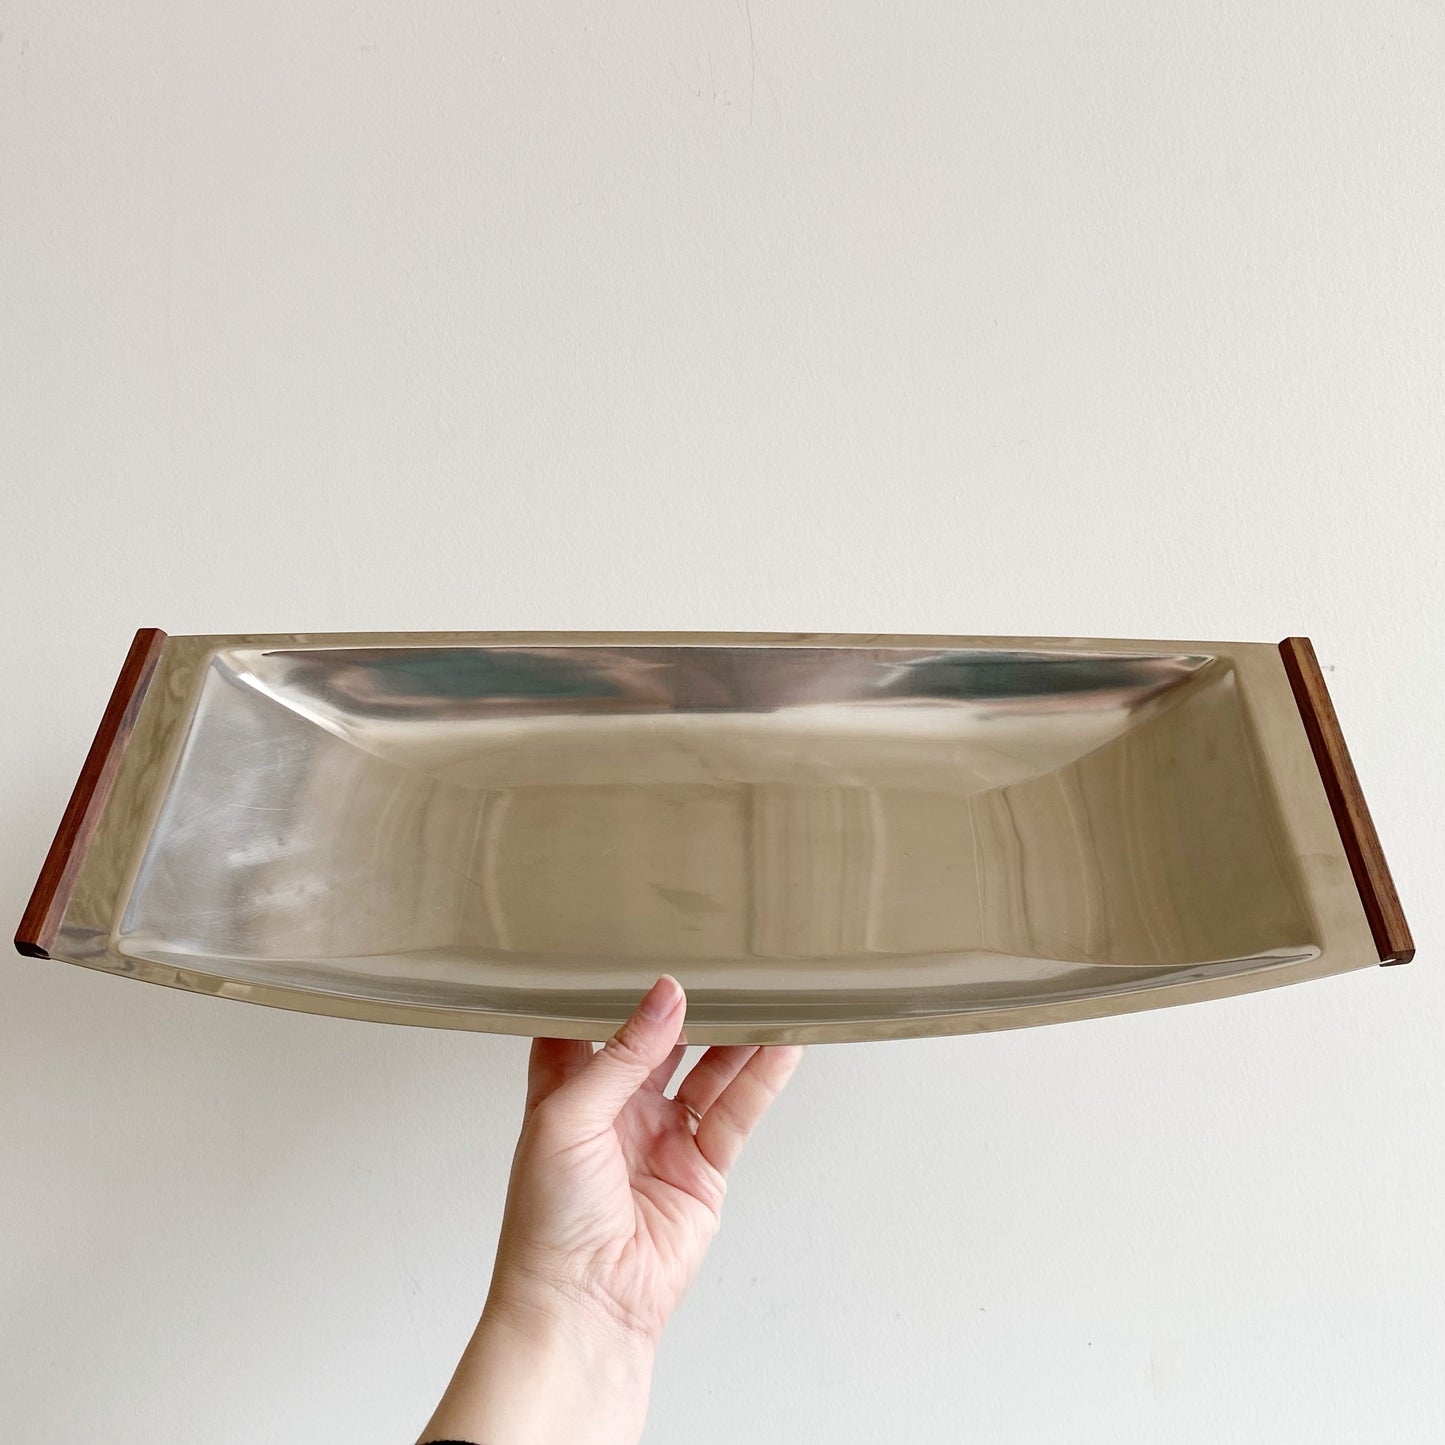 XL Vintage Danish Stainless Steel Serving Tray, 19"